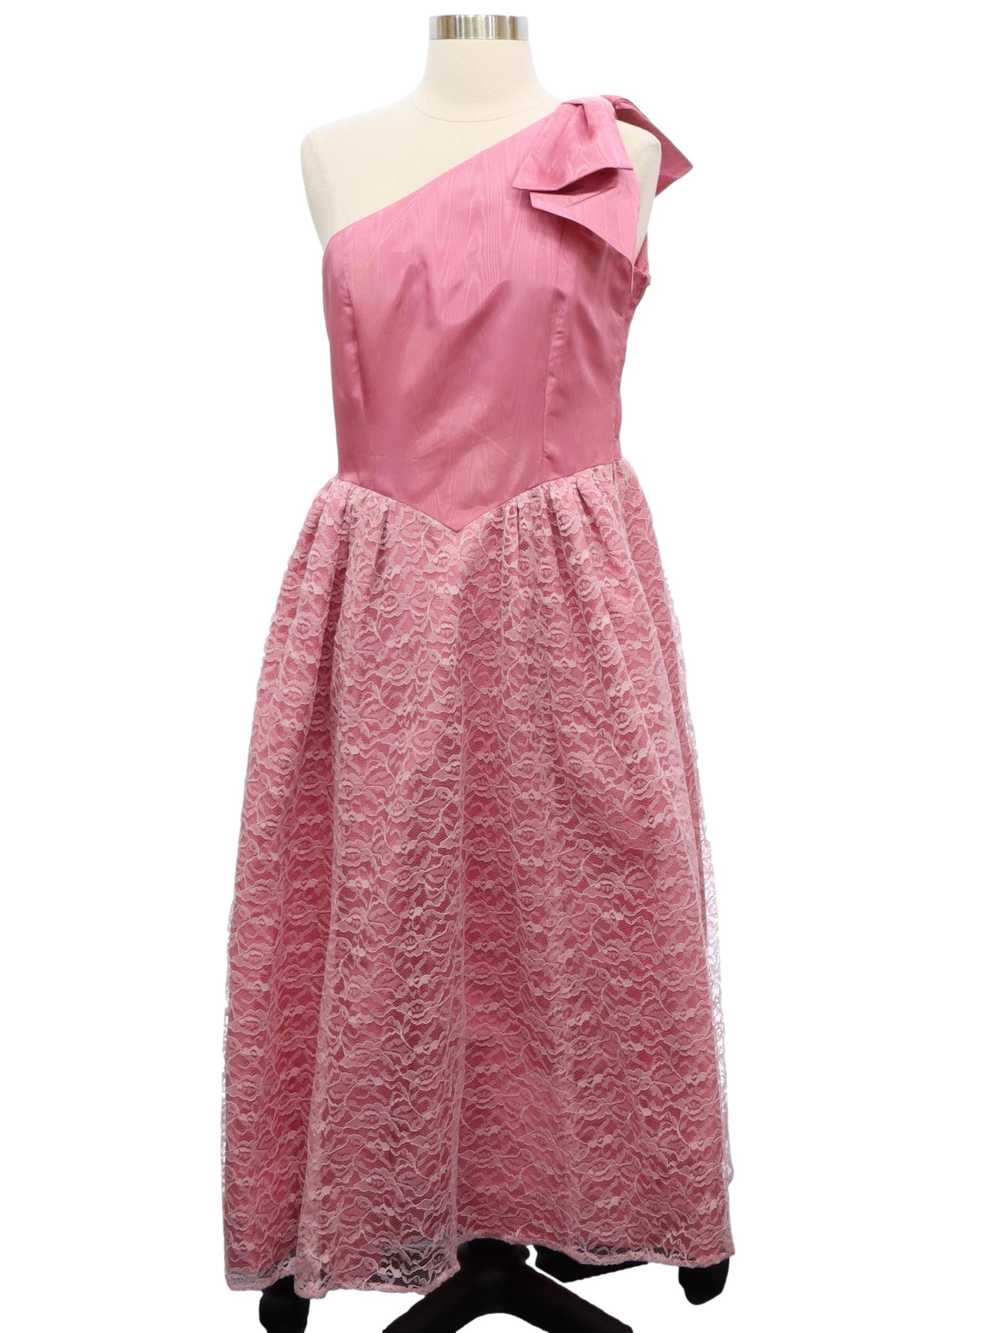 1980's Totally 80s Prom or Cocktail Dress - image 1